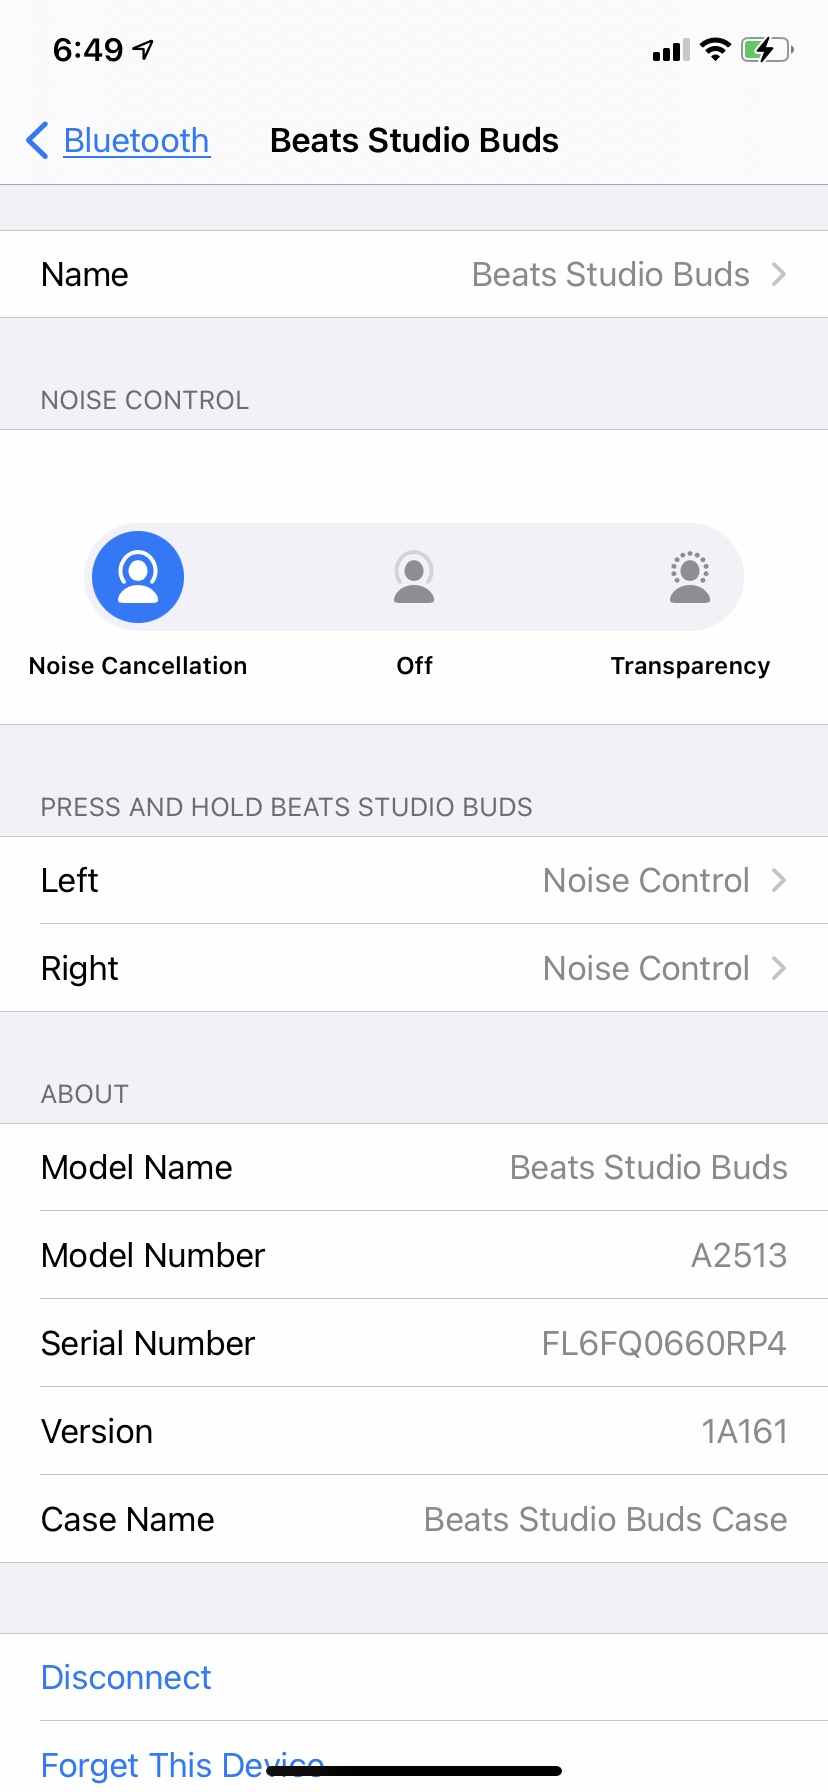 Beats Studio Buds Are The AirPods Pro Lite |